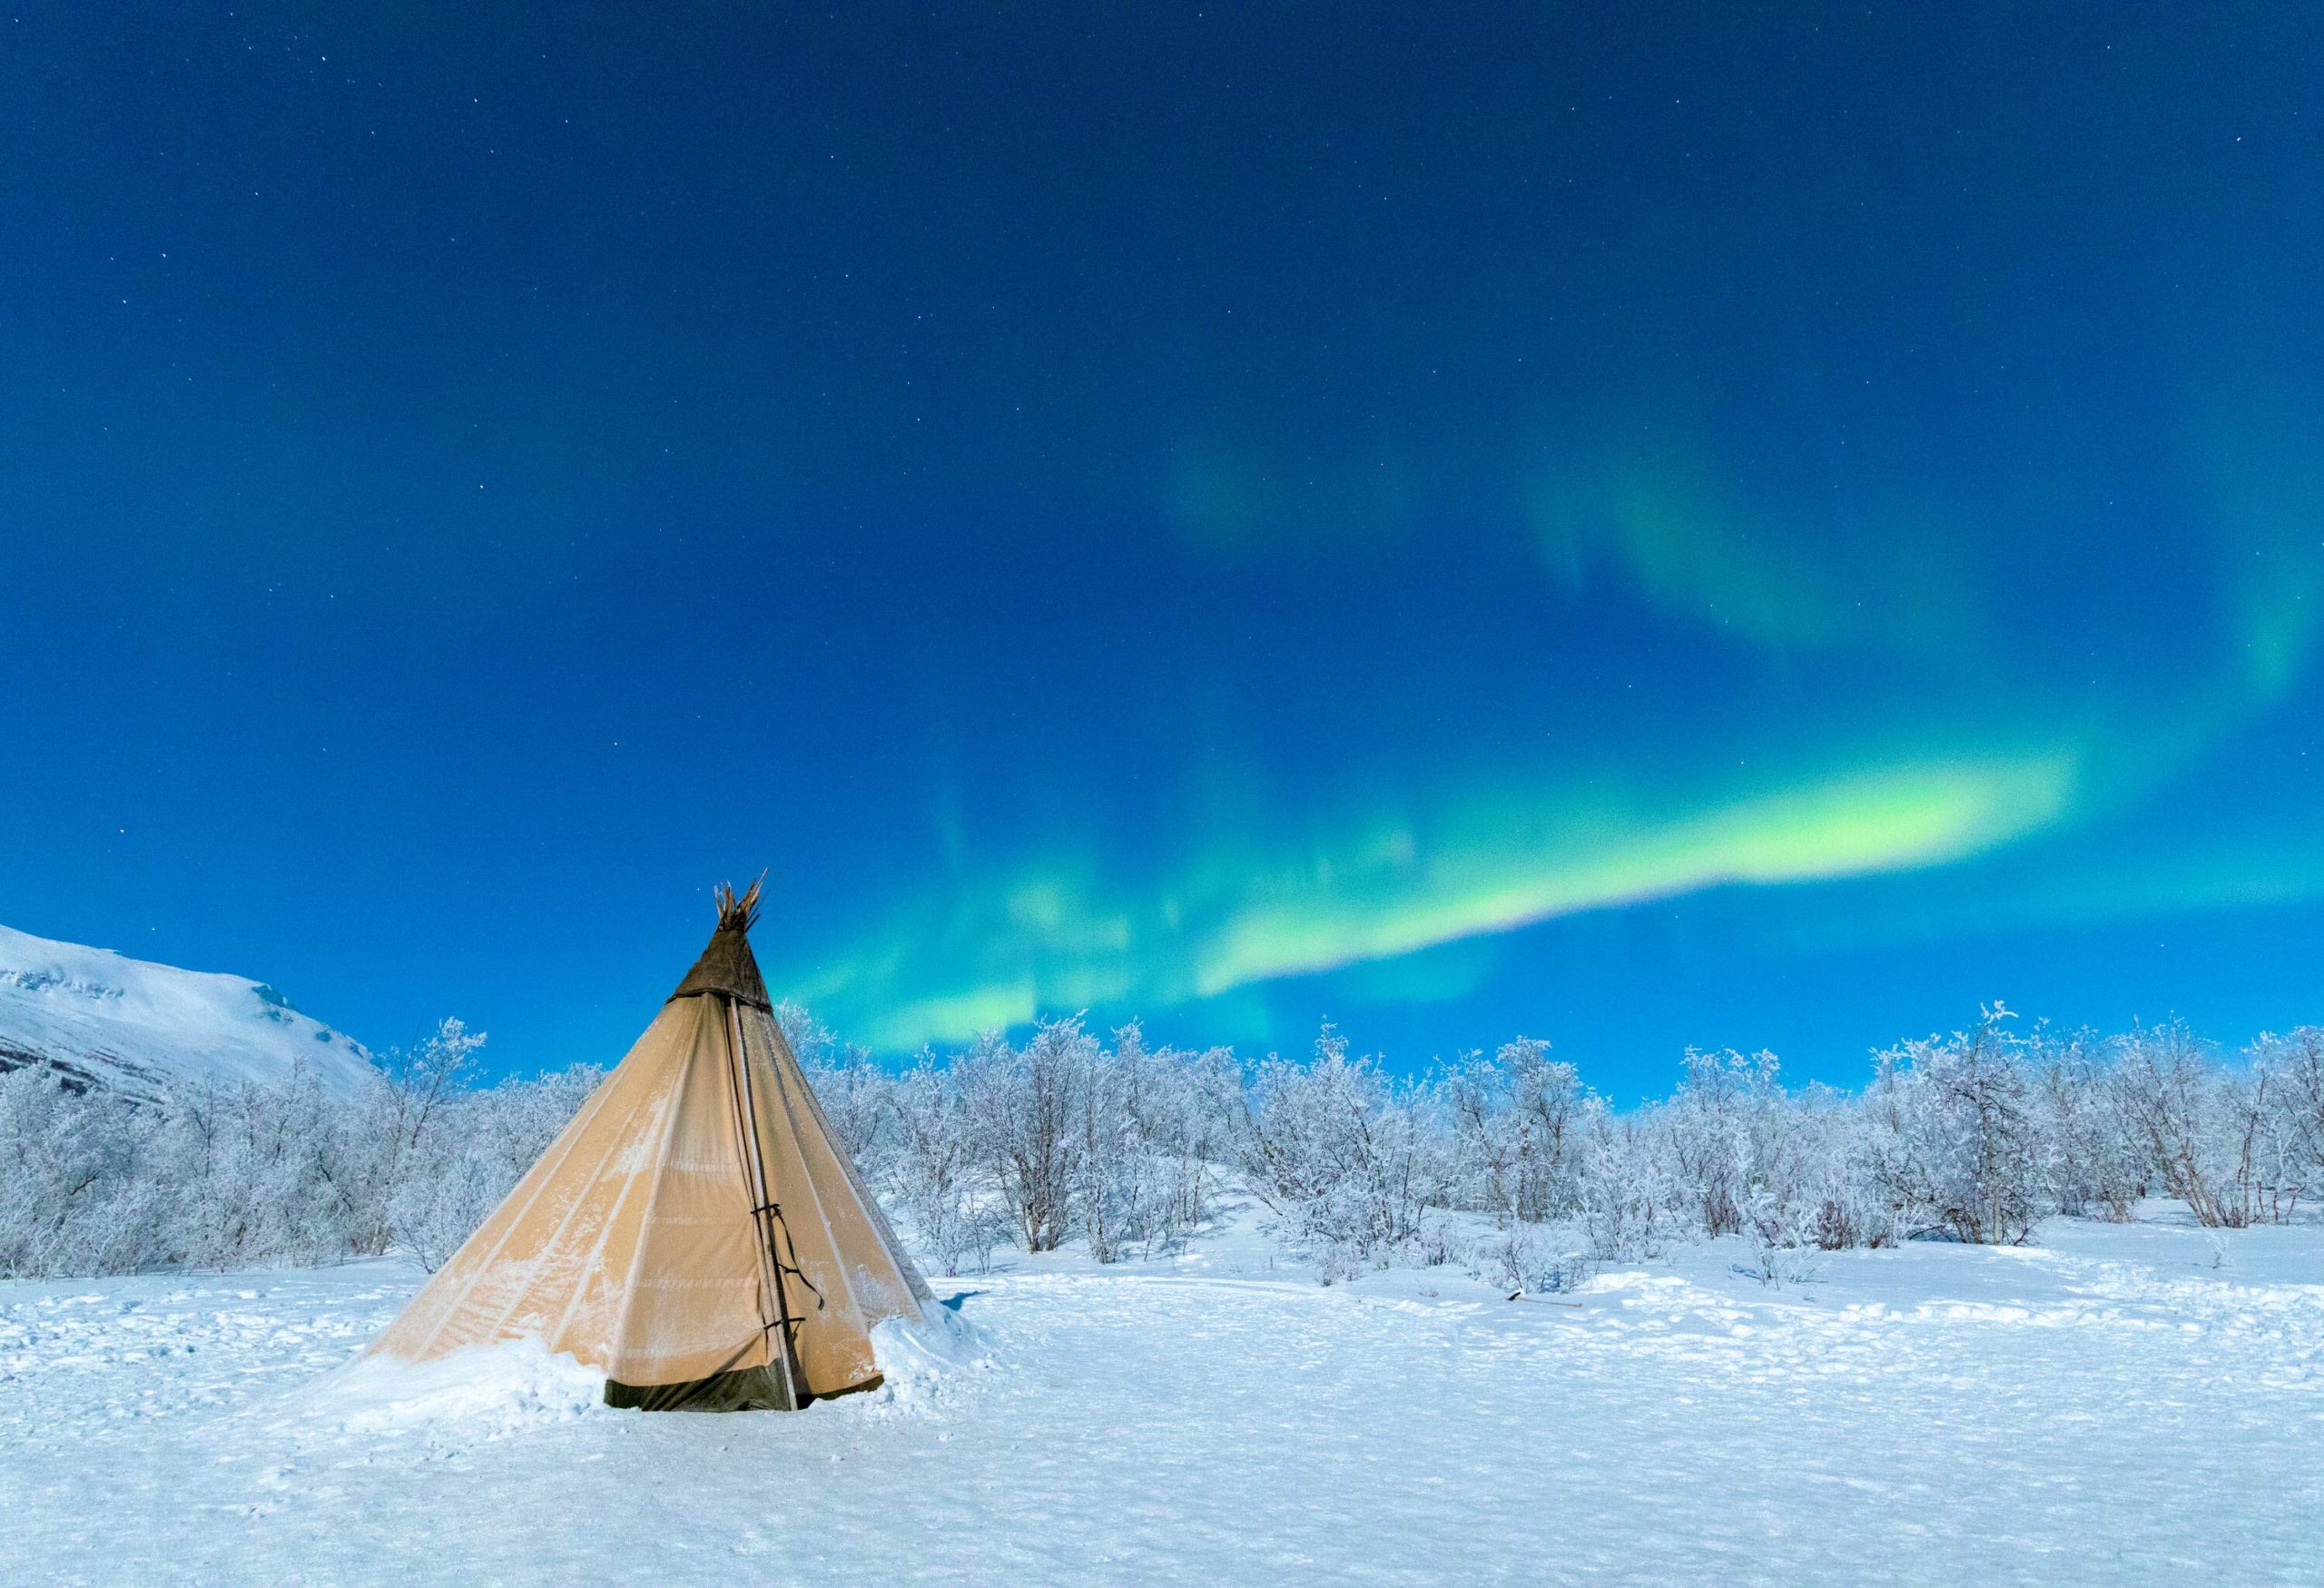 A Lavvu tent pitched on a snowfield with the northern lights swirling across the blue sky.